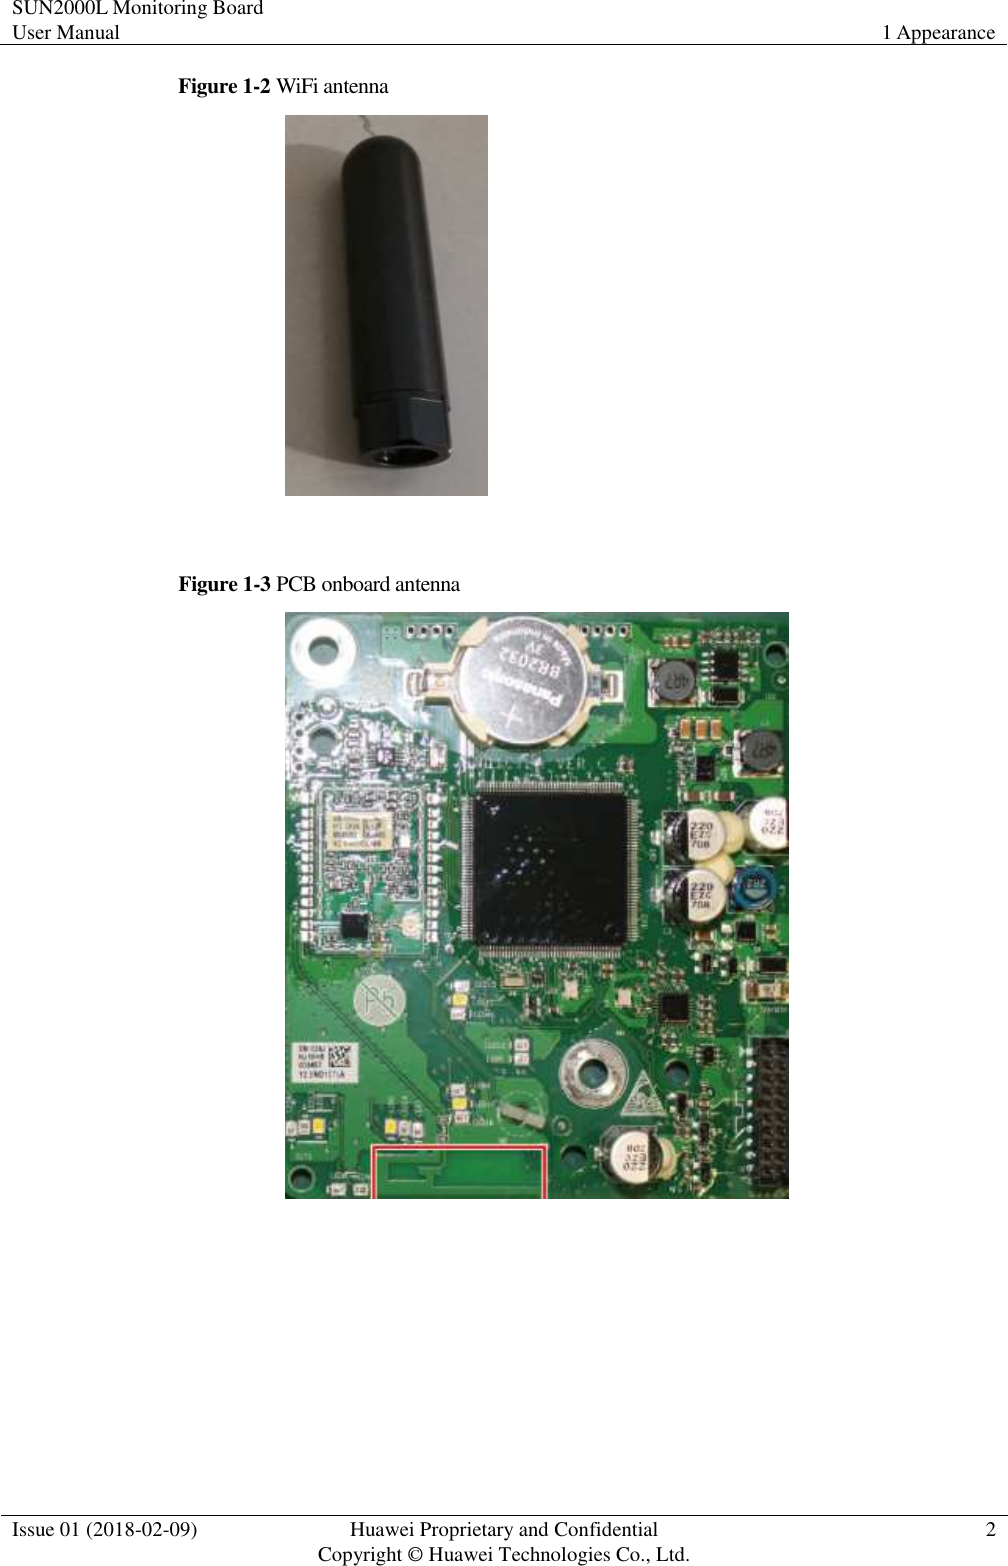 SUN2000L Monitoring Board User Manual 1 Appearance  Issue 01 (2018-02-09)  Huawei Proprietary and Confidential                   Copyright © Huawei Technologies Co., Ltd. 2  Figure 1-2 WiFi antenna   Figure 1-3 PCB onboard antenna 